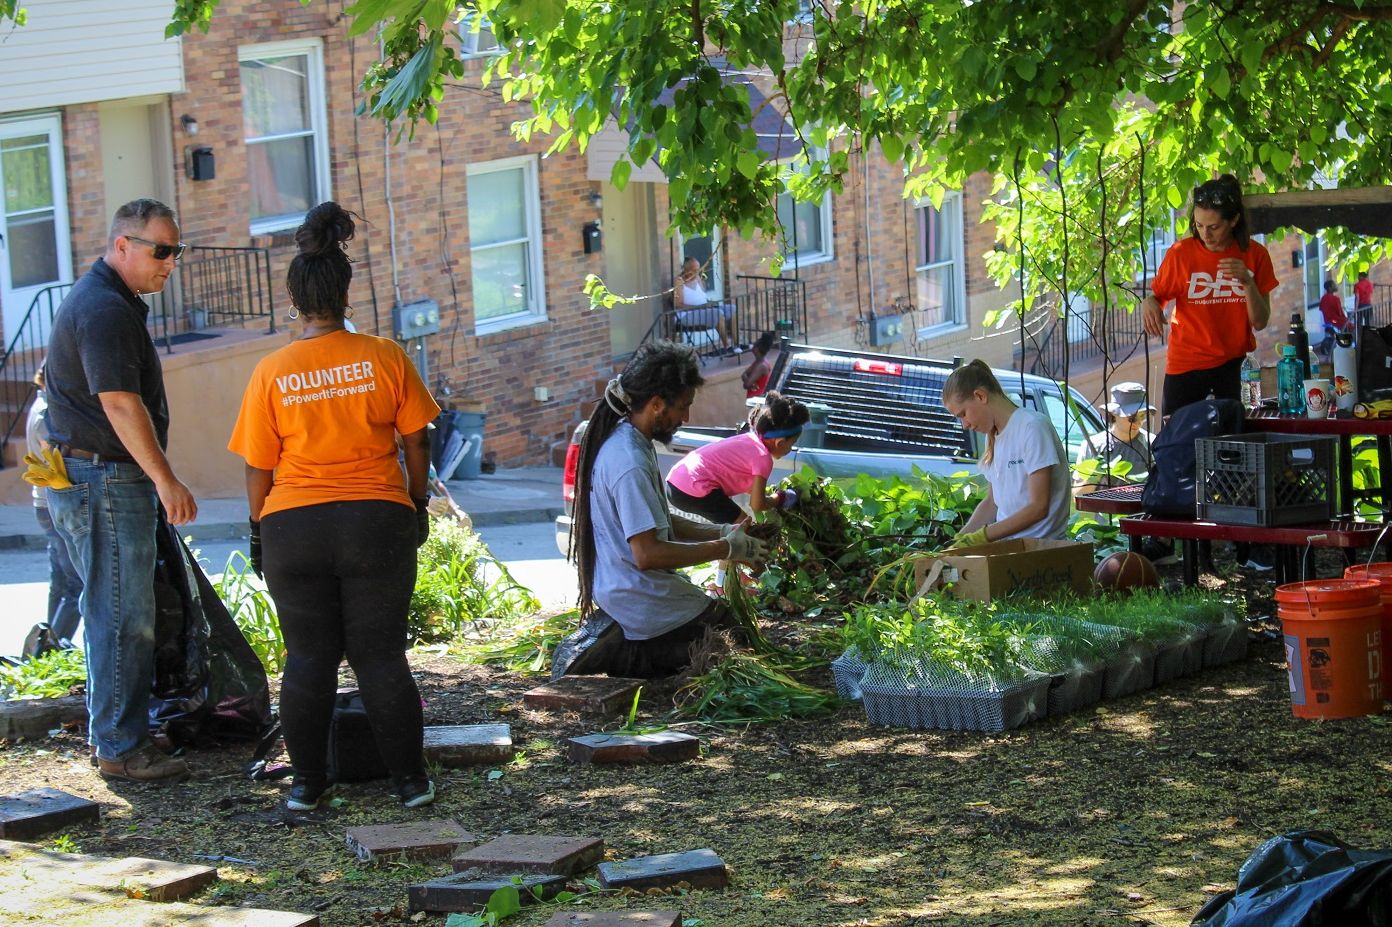 Masoud Sayles (center) of Grounded Strategies, separates flowers during an planting event with Duquesne Light Co. in Pittsburgh's Hill District on June 17, 2022.